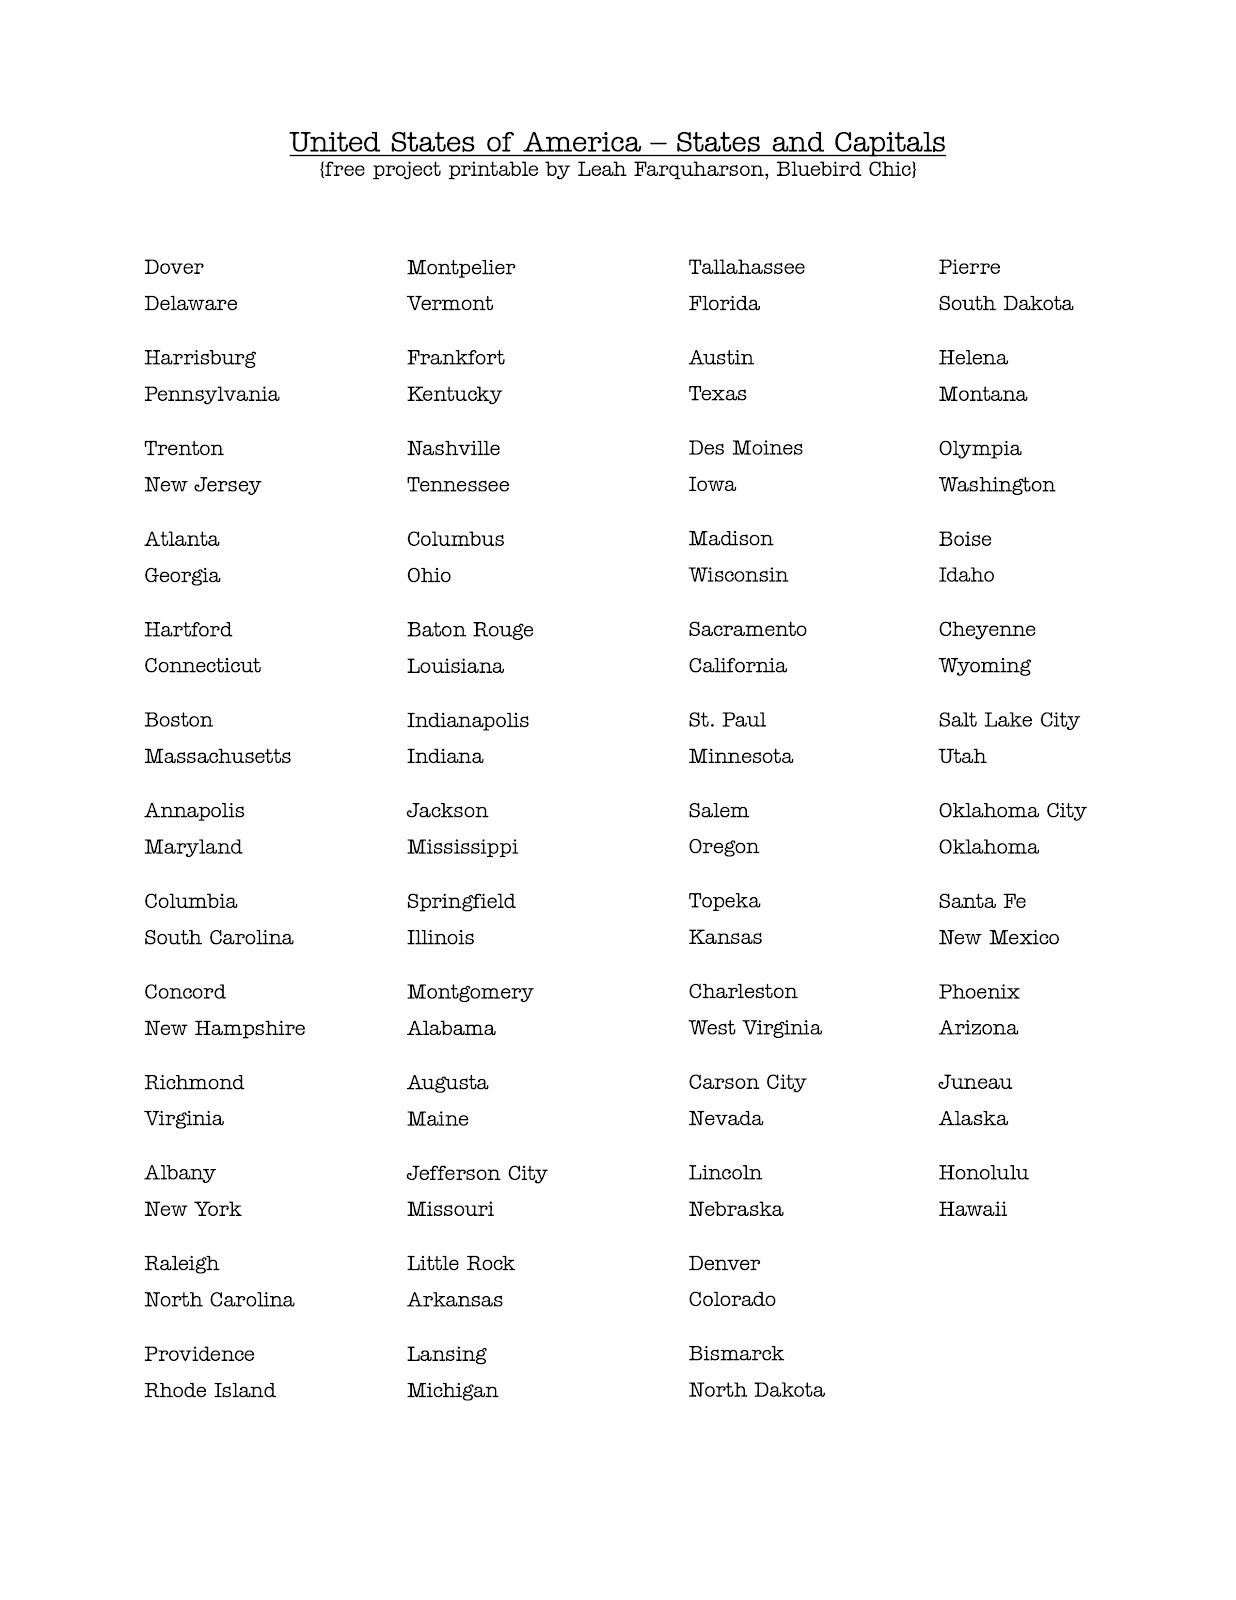 Free Printable List Of States And Capitals